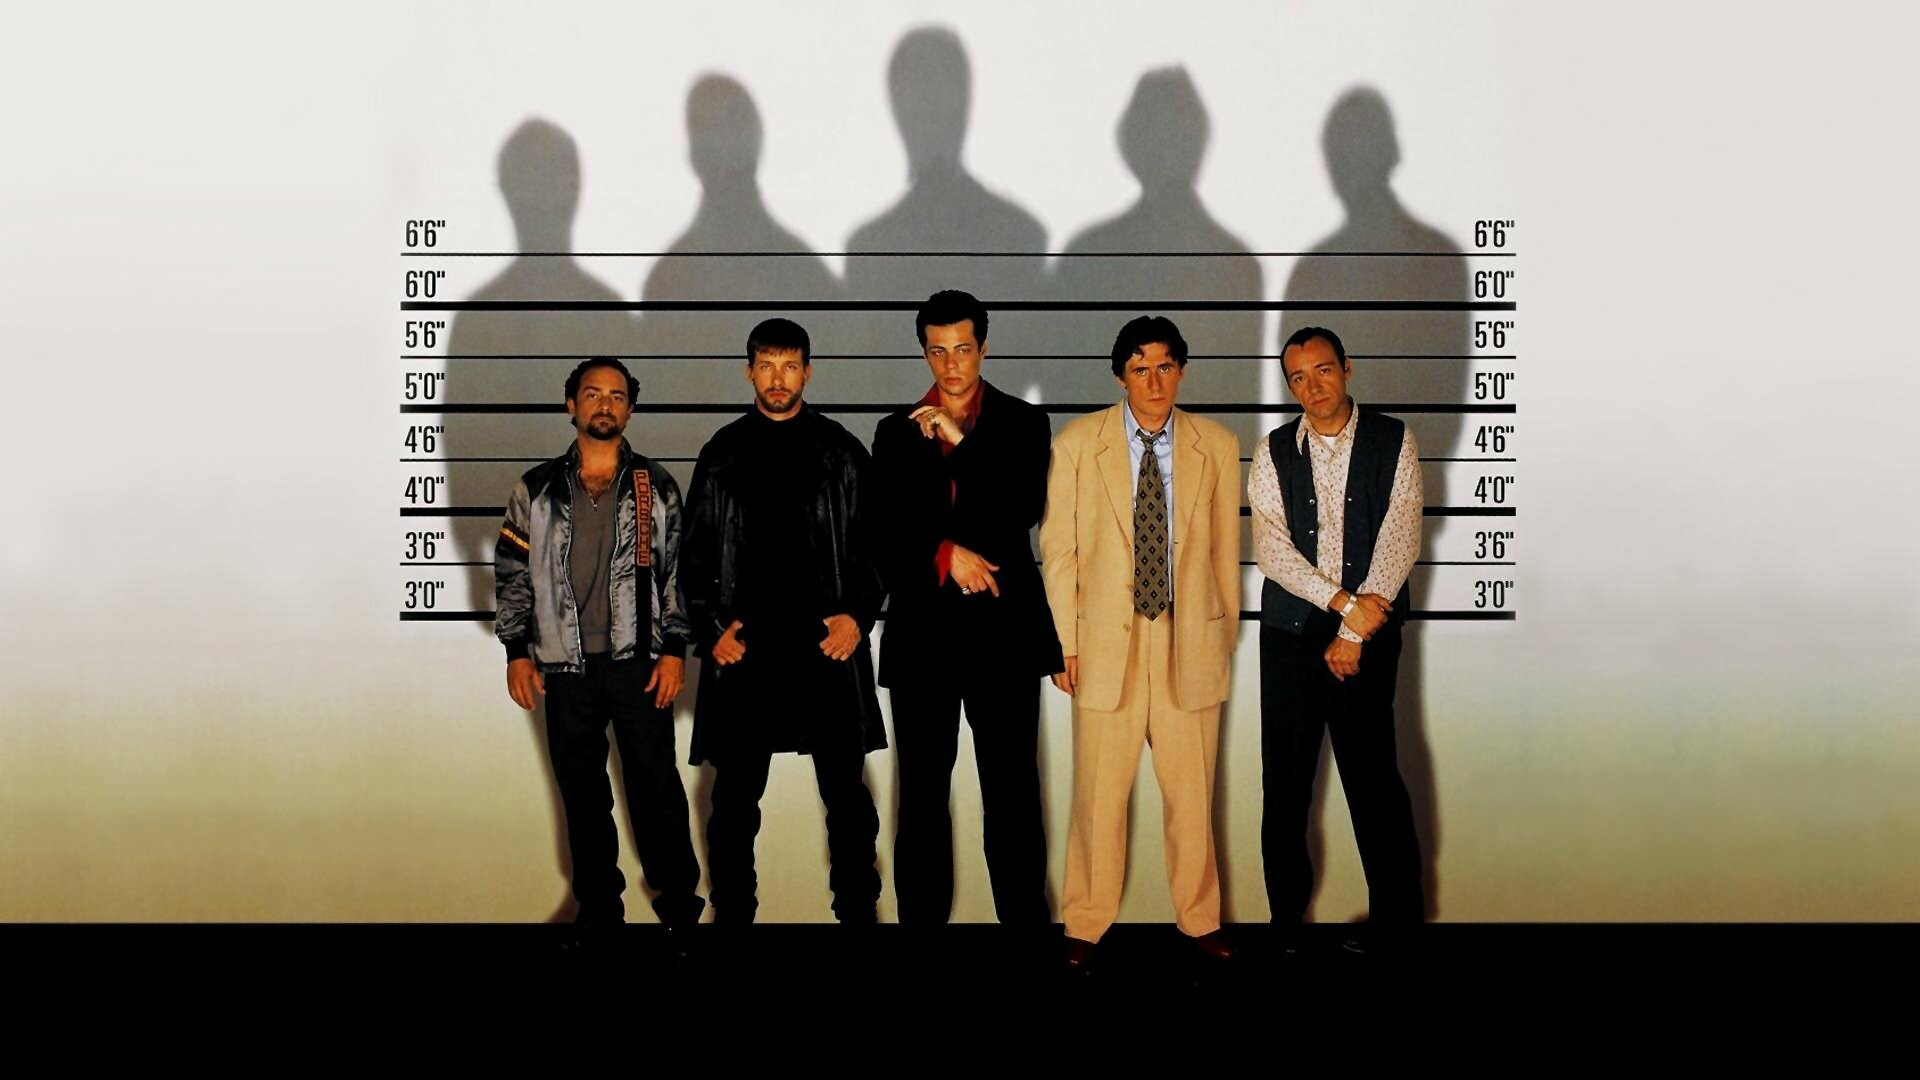 The Usual Suspects: Kevin Spacey won the Academy Award for Best Supporting Actor for his performance in this film. 1920x1080 Full HD Background.